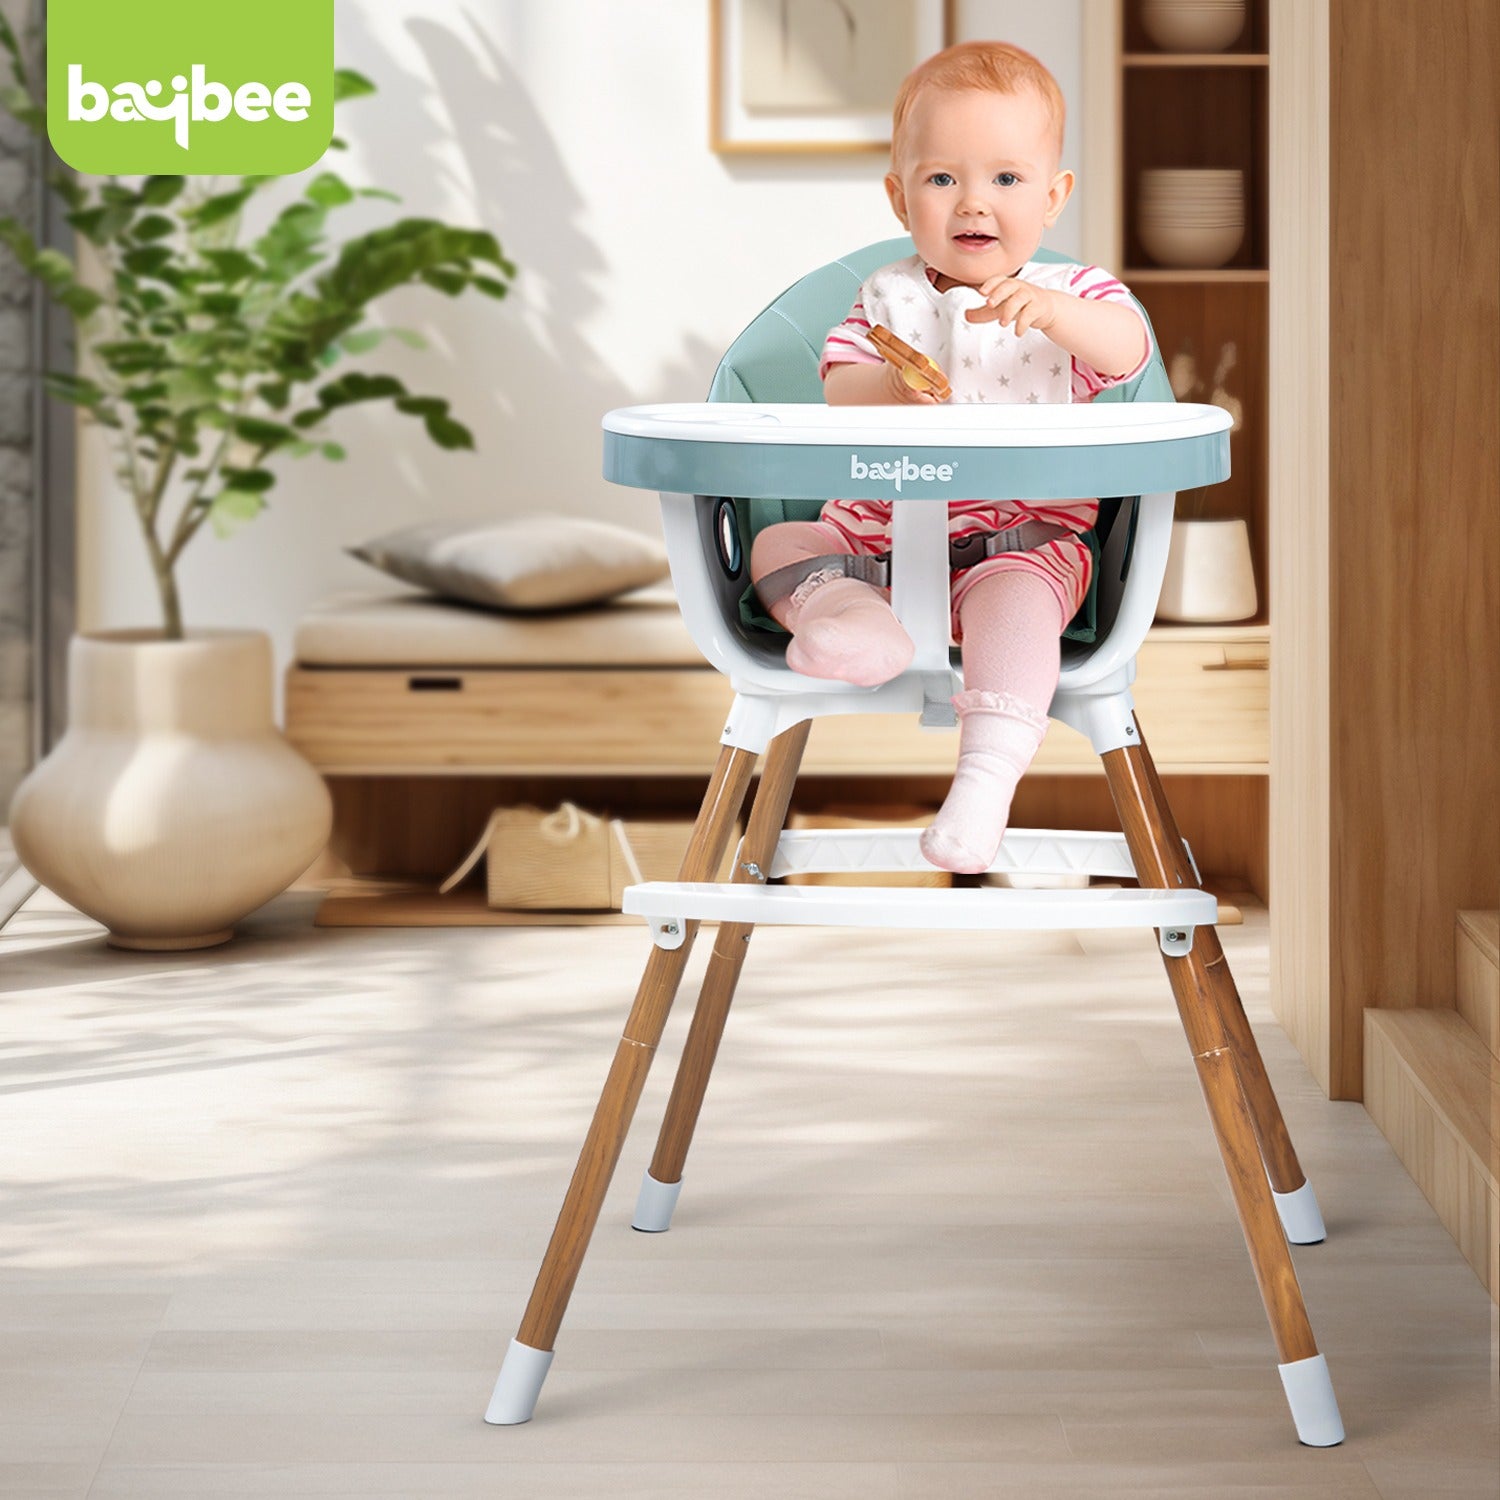 Minikin 2 in 1 Hades High Chair cum Low Chair I Wooden Finish Stainless Steel Base I 6 Months - 3 Years